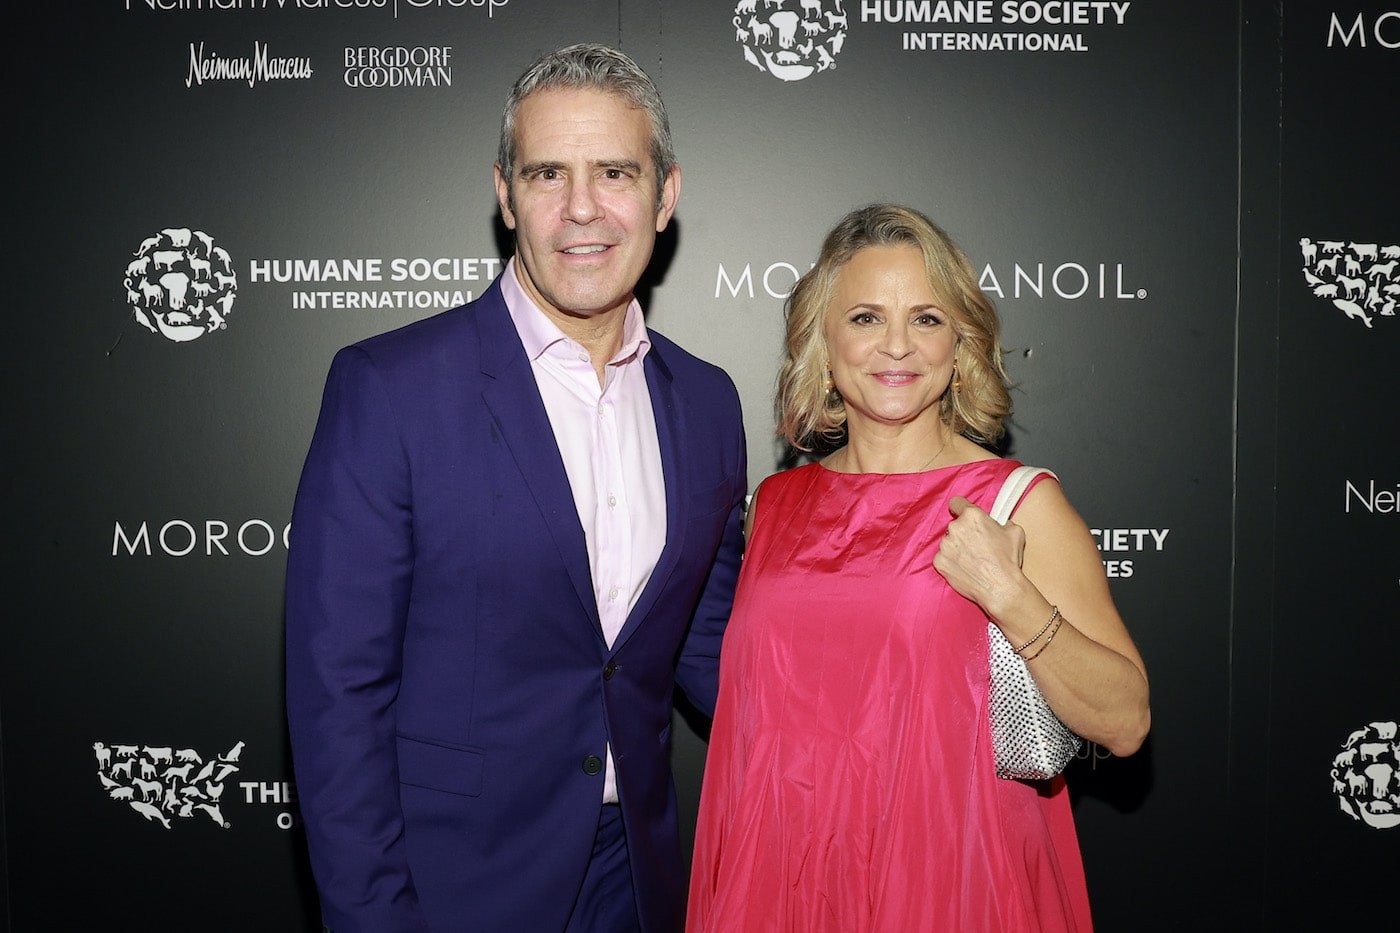 Andy Cohen and Amy Sedaris attend an event